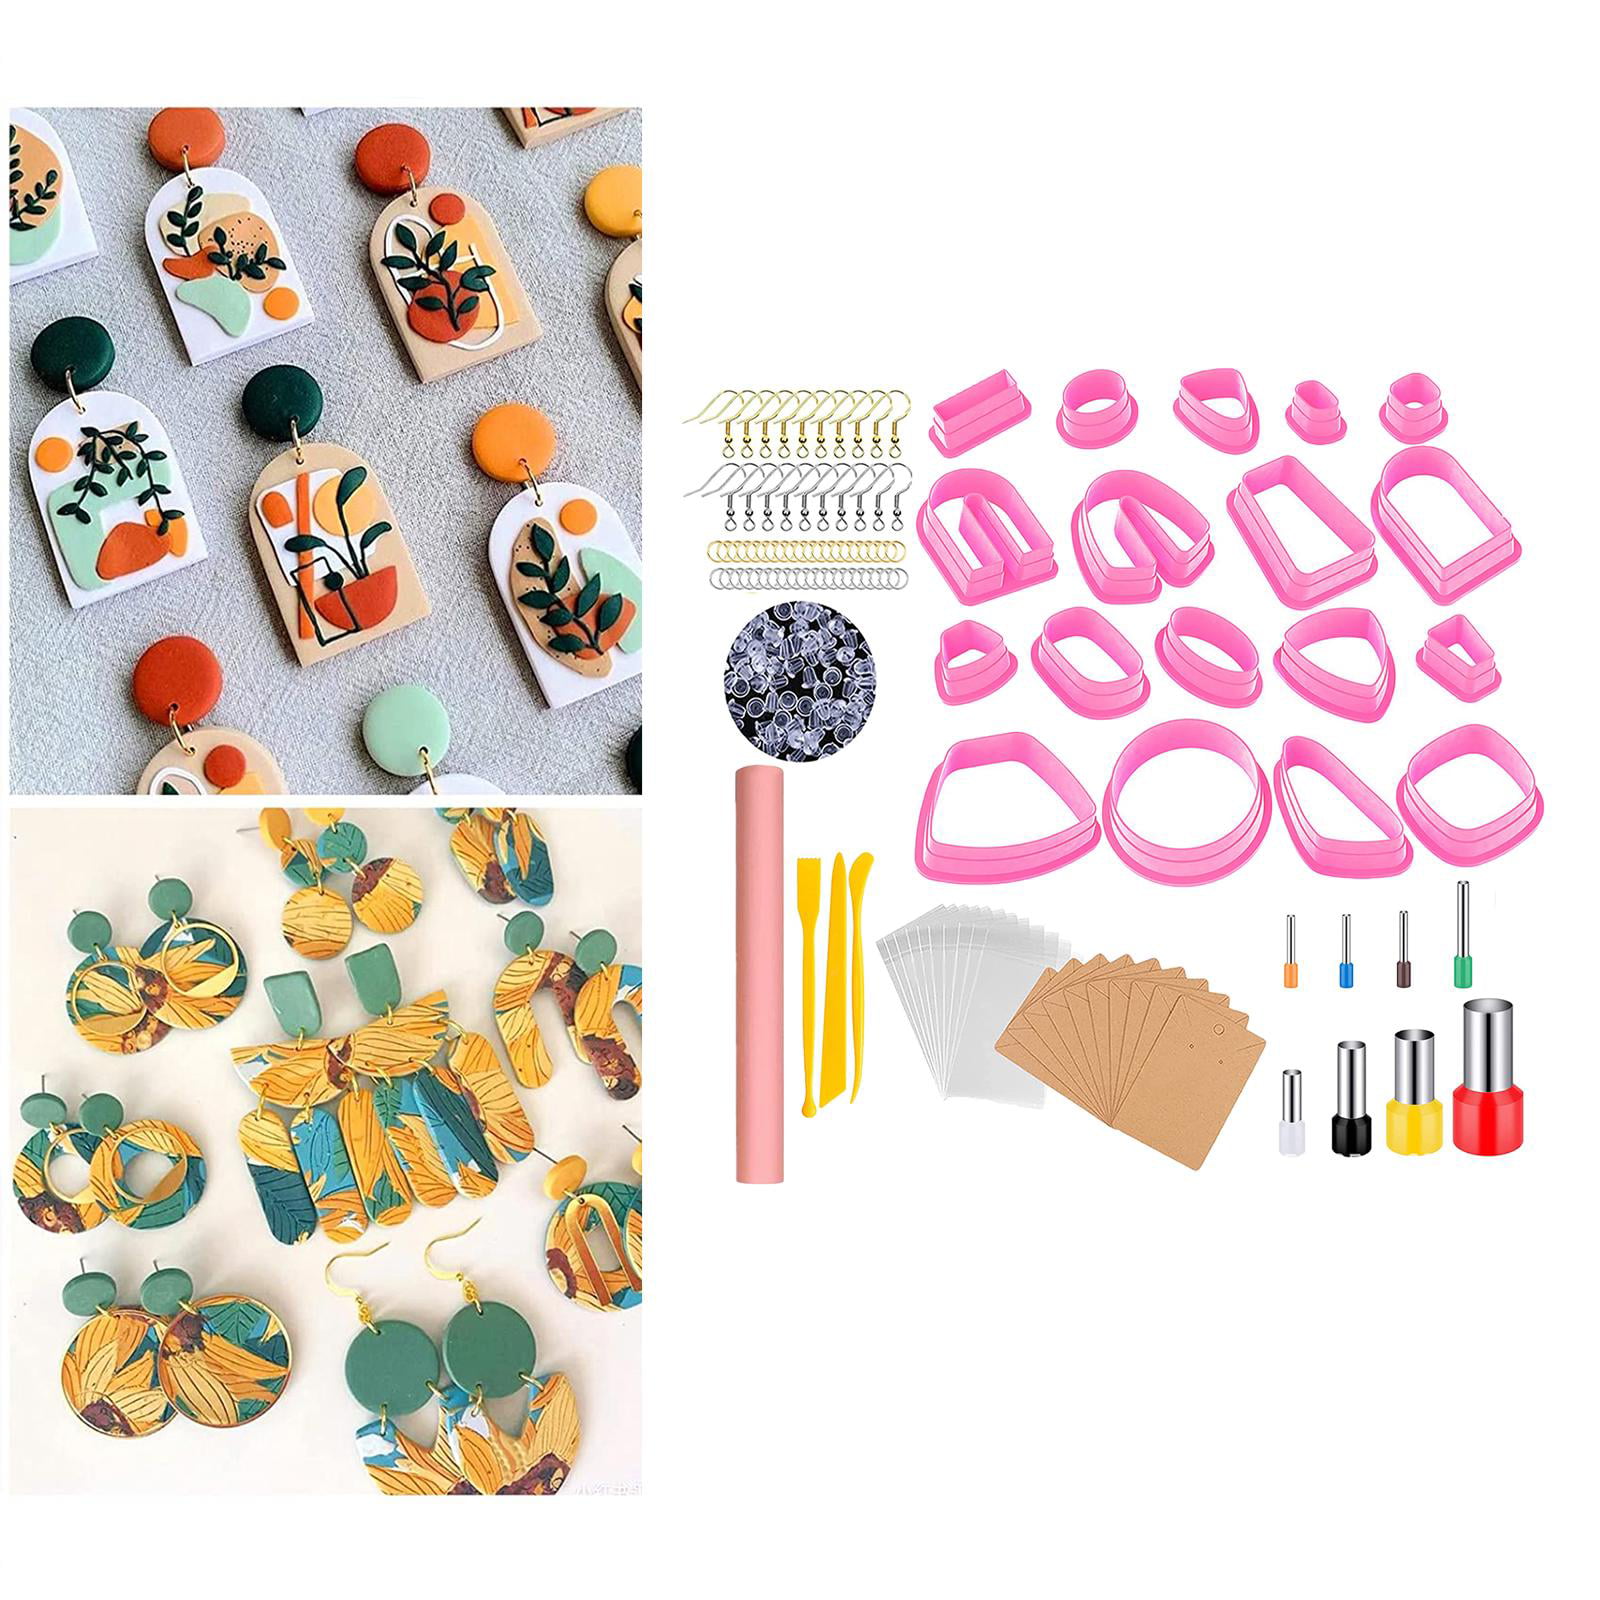  Aksucer 310Pcs Polymer Clay Earring Making Kit Include